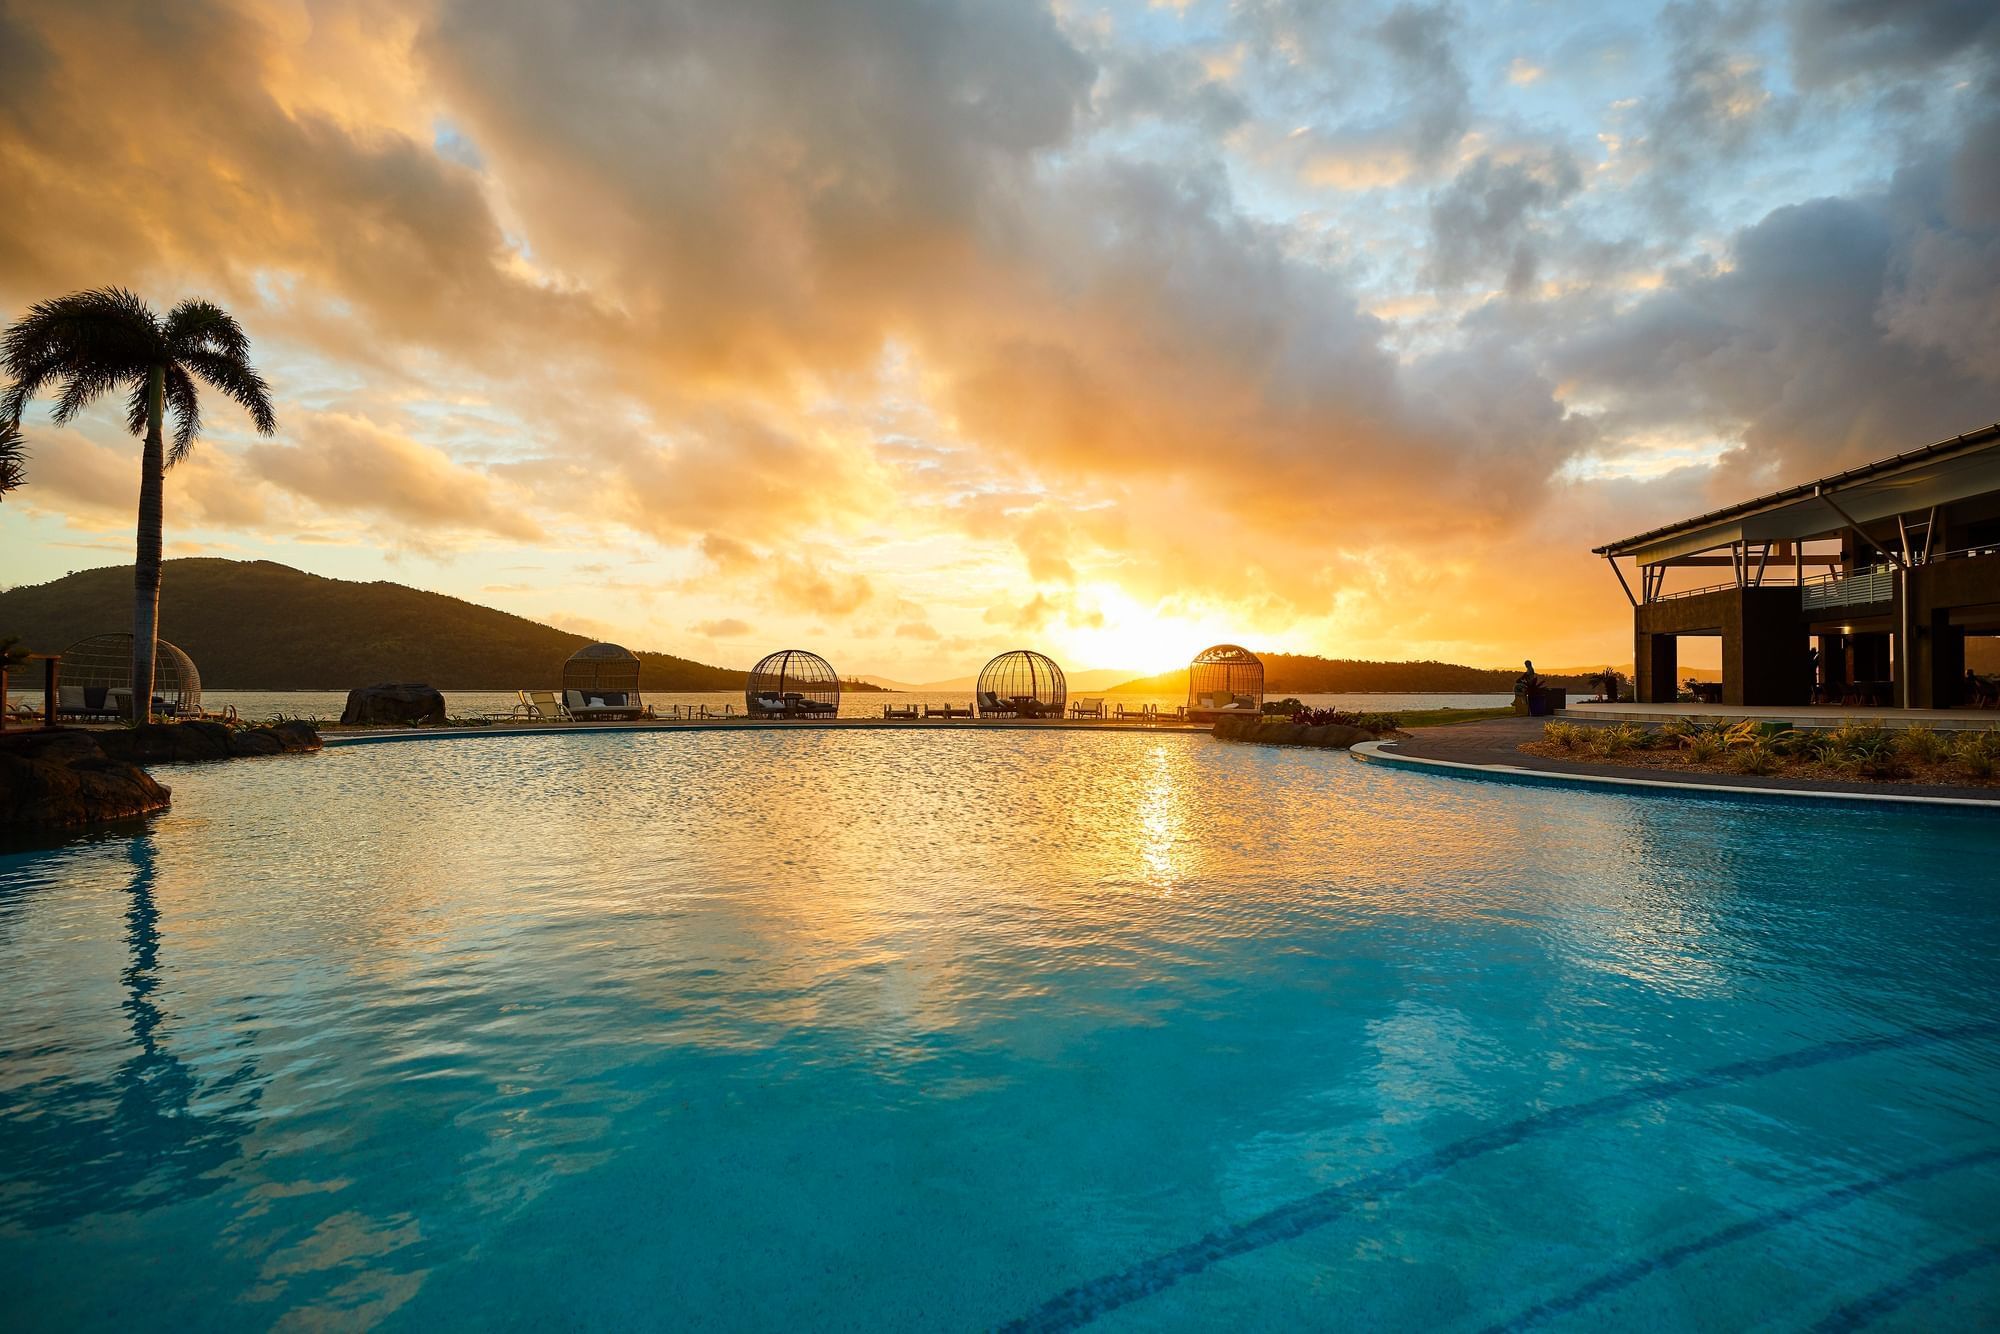 View of the pool during the sunset at Daydream Island Resort